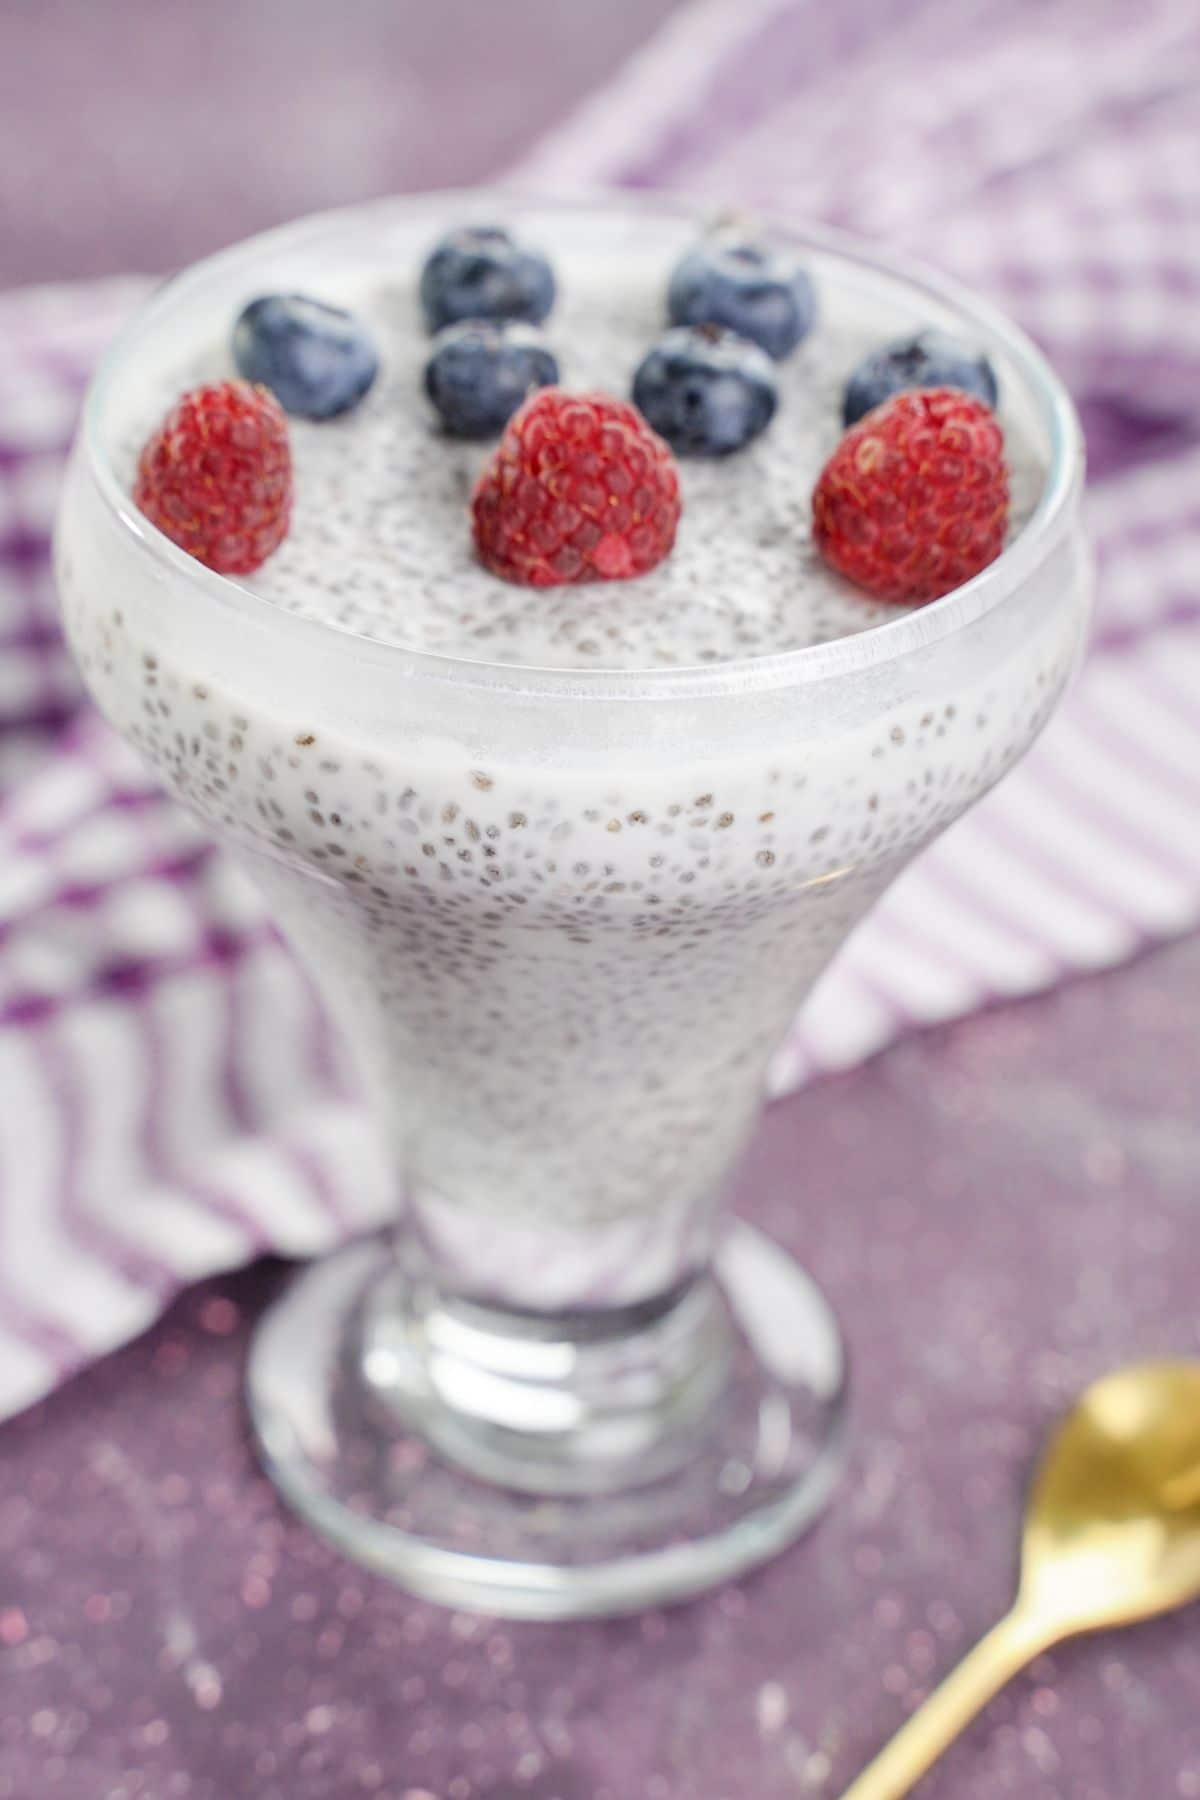 No-Bake Chia Pudding served in a glass